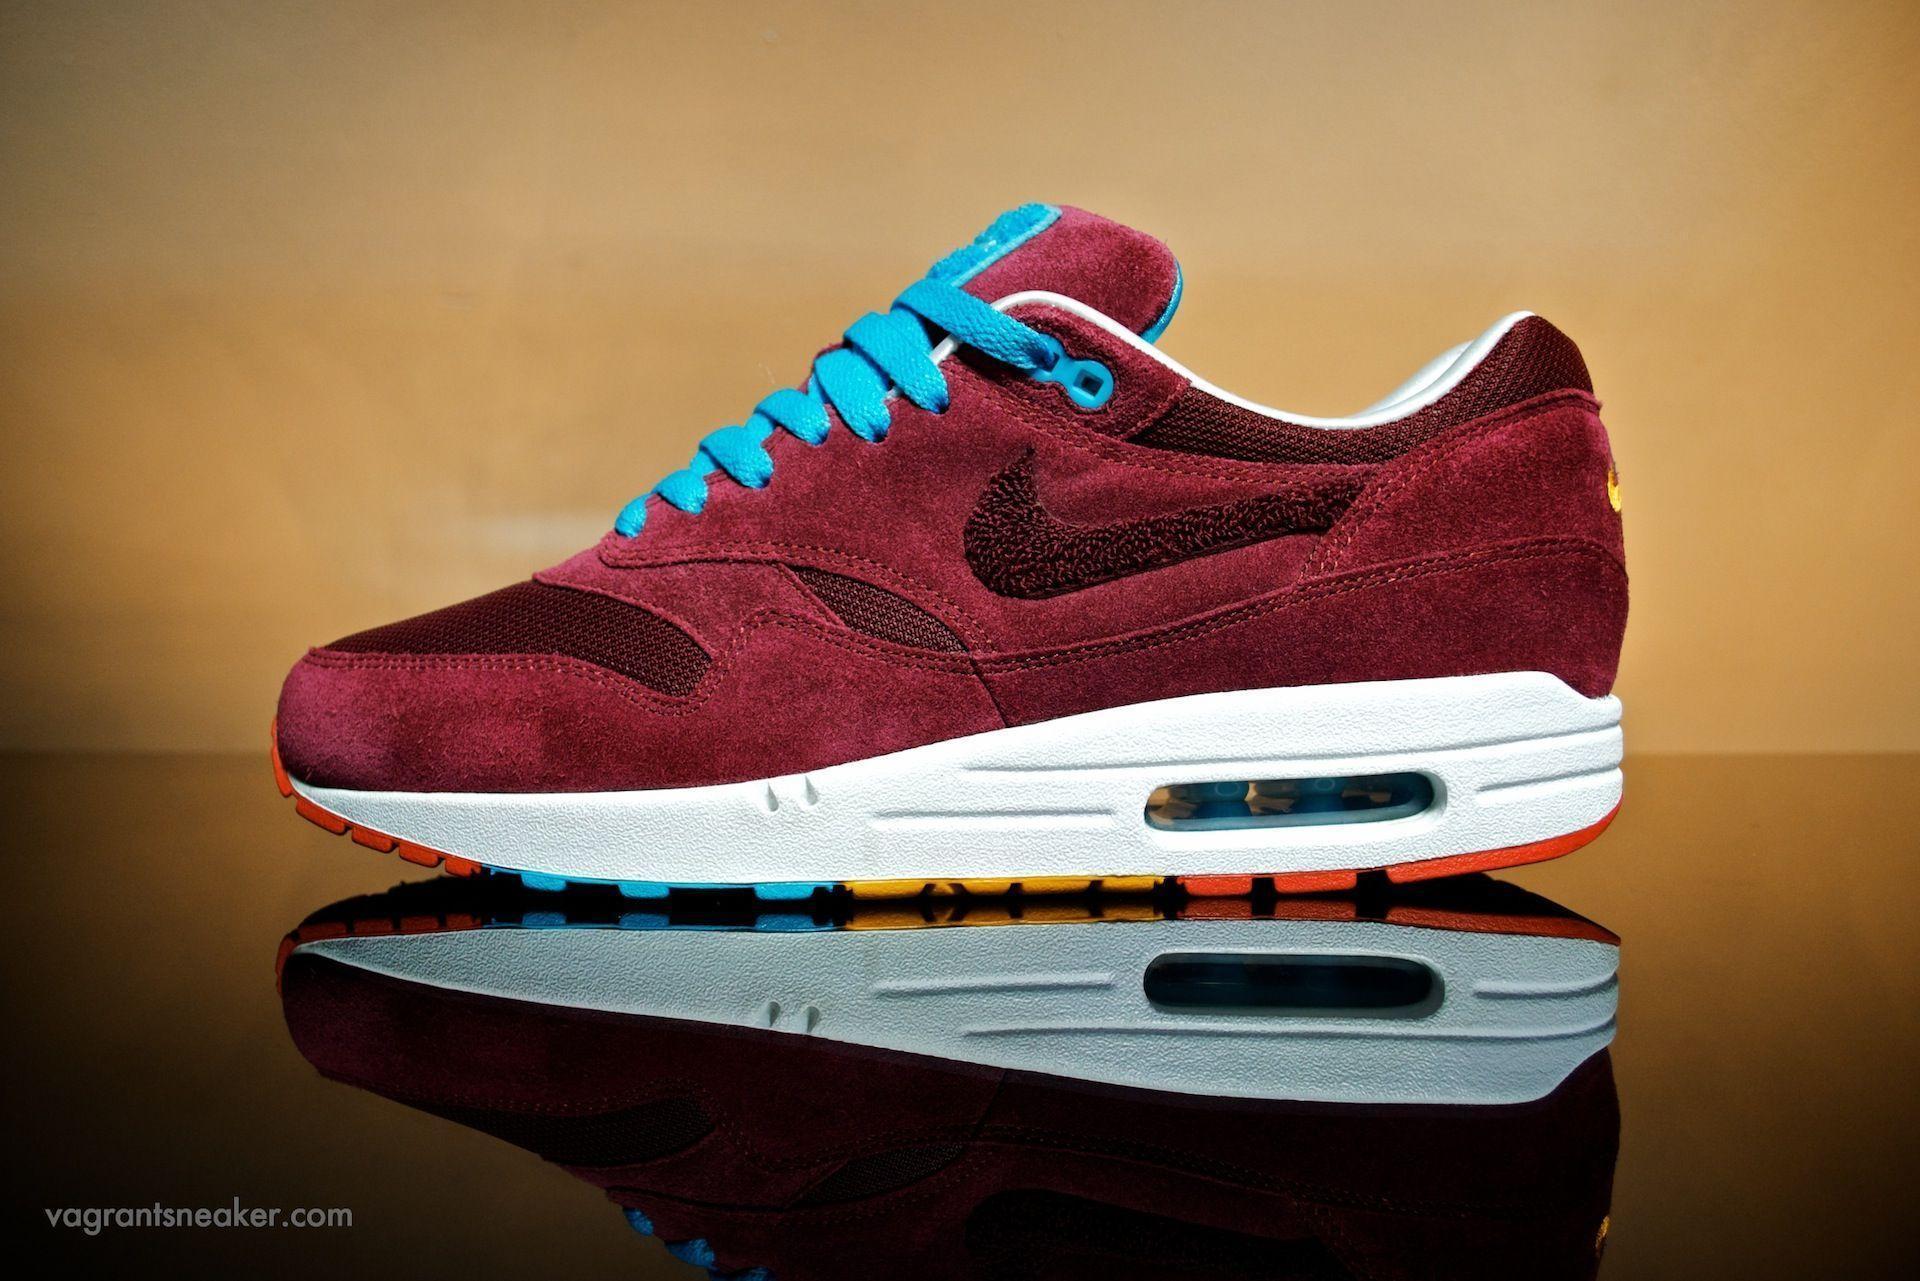 Nike Air Max Wallpaper Pictures toon Pinterest